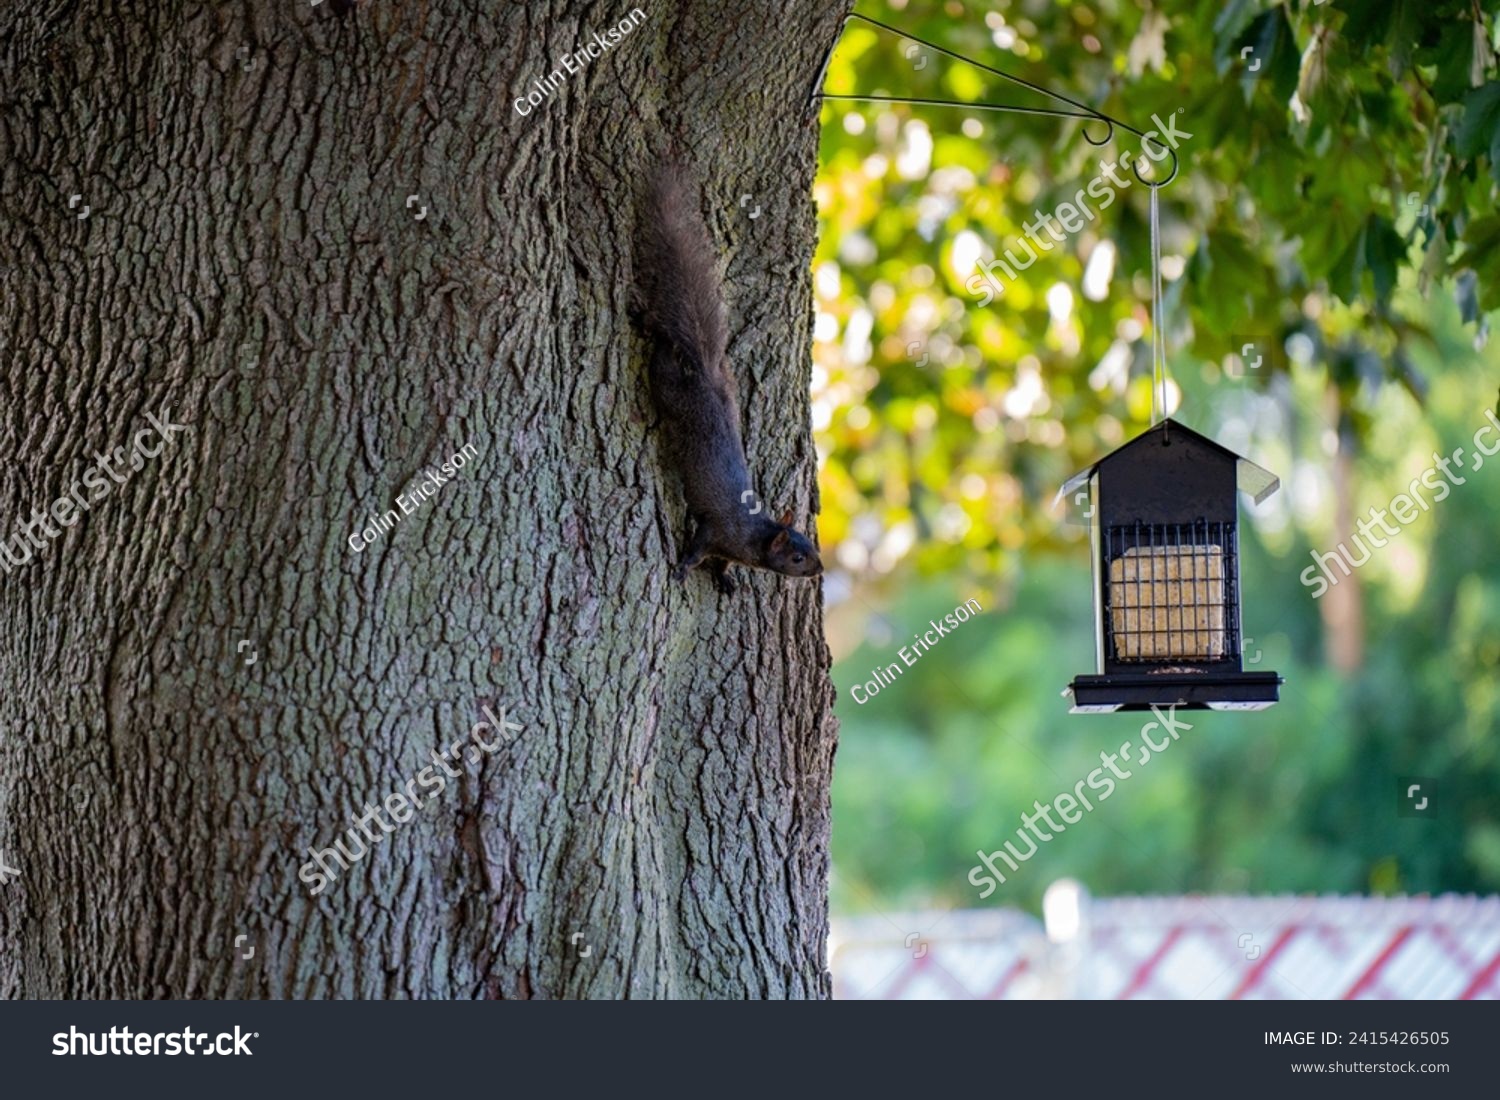 A squirrel eyeing up and looking at a bird feeder while hanging on the side of a tree, upside down. #2415426505